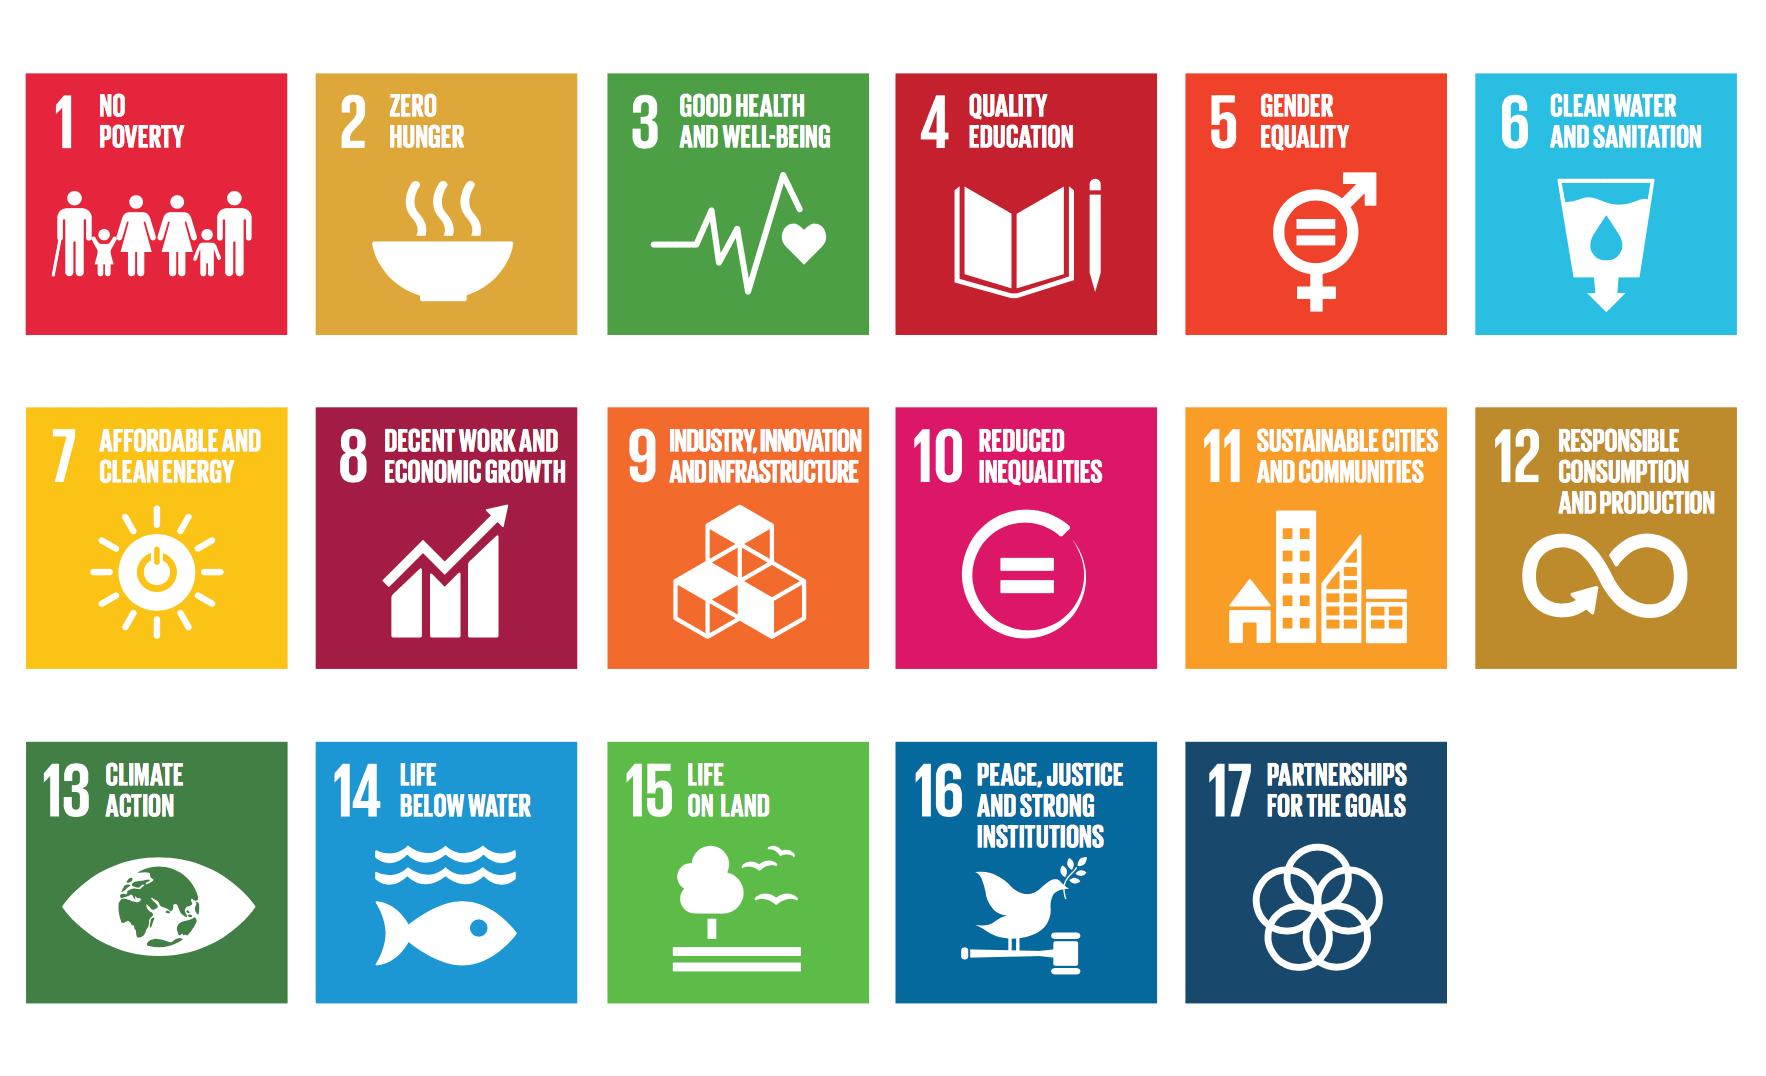 research topics on sustainable development goals